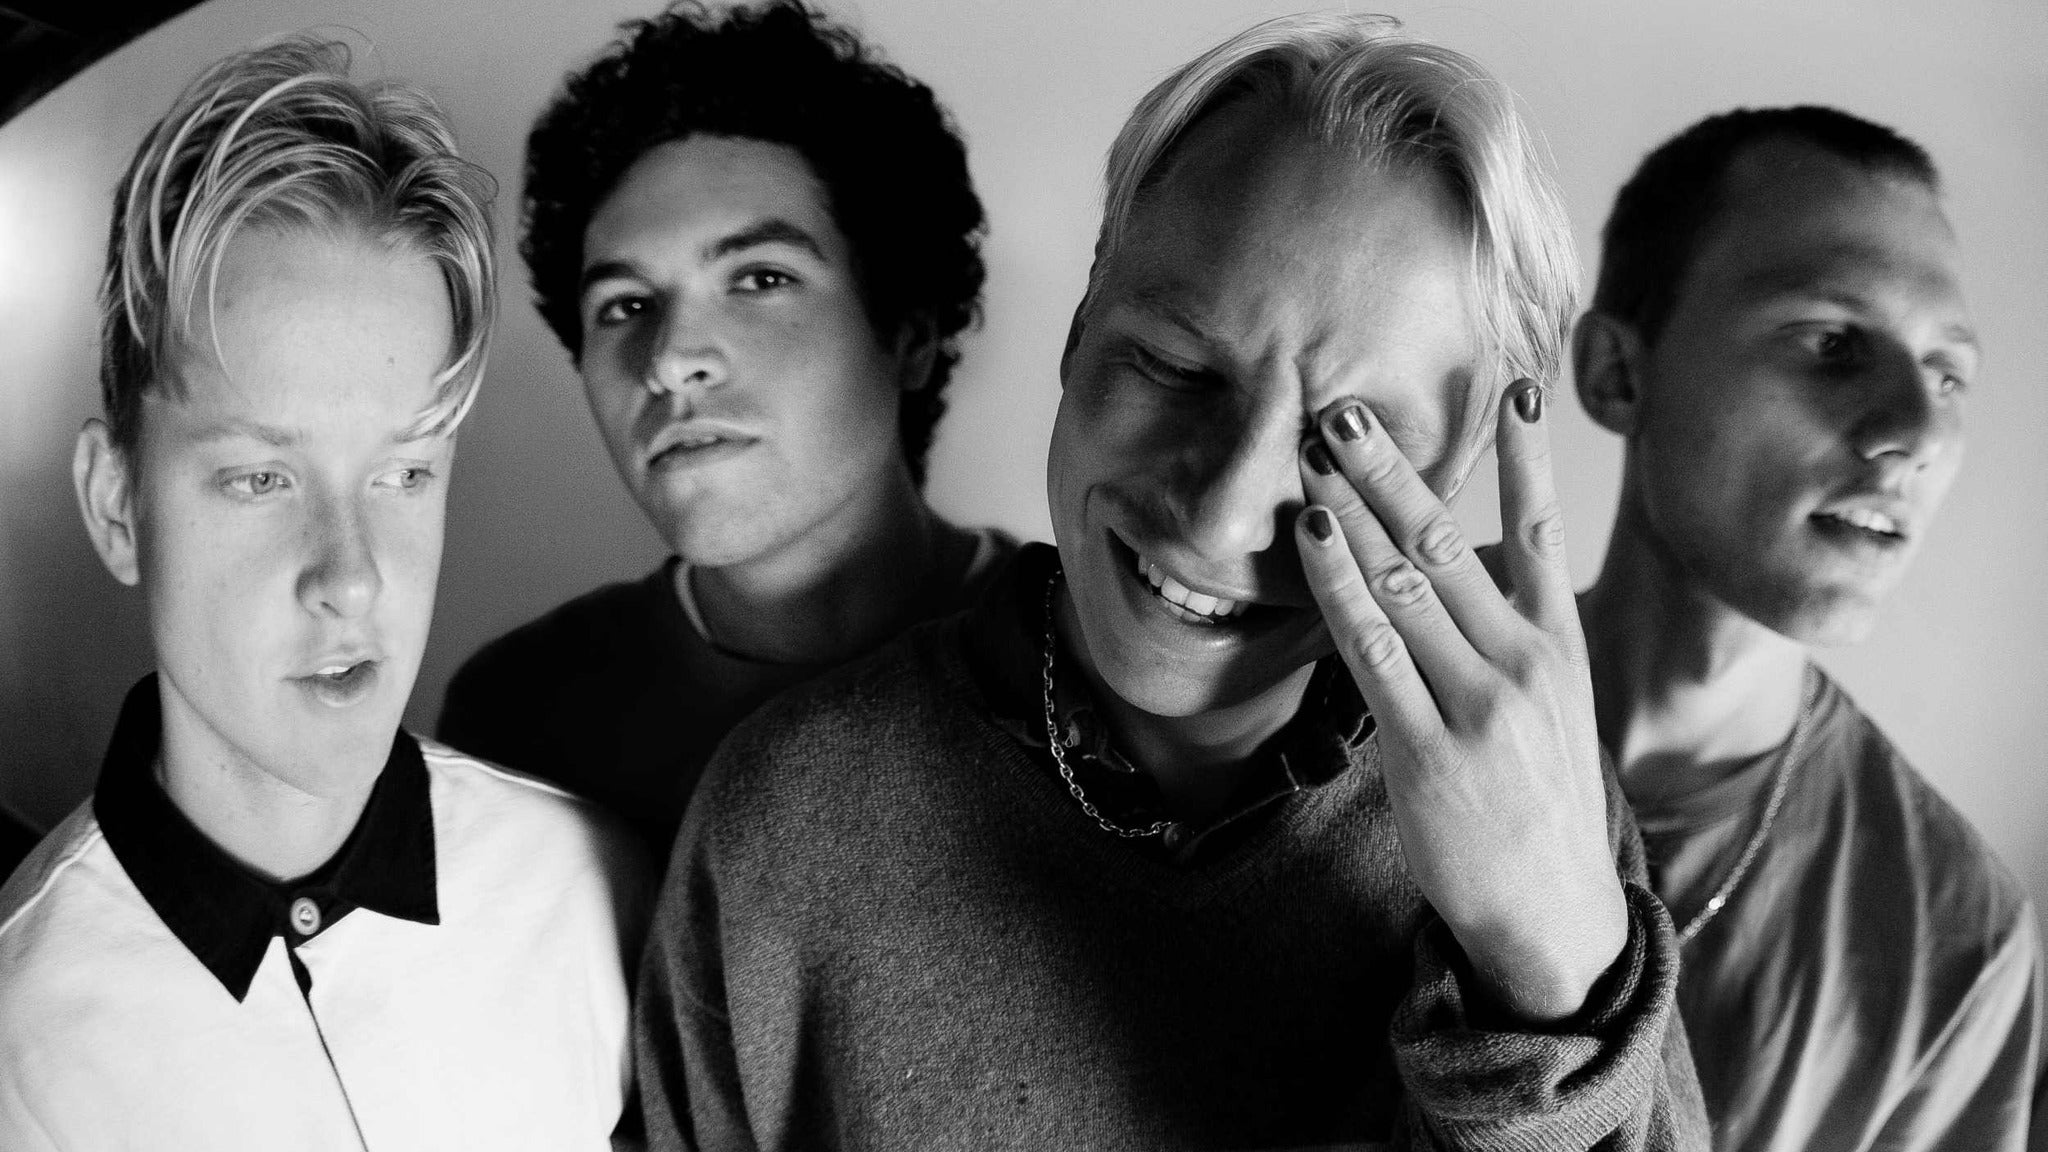 SWMRS Presents: UNCOOL Fest 5 in Hollywood promo photo for Citi® Cardmember presale offer code